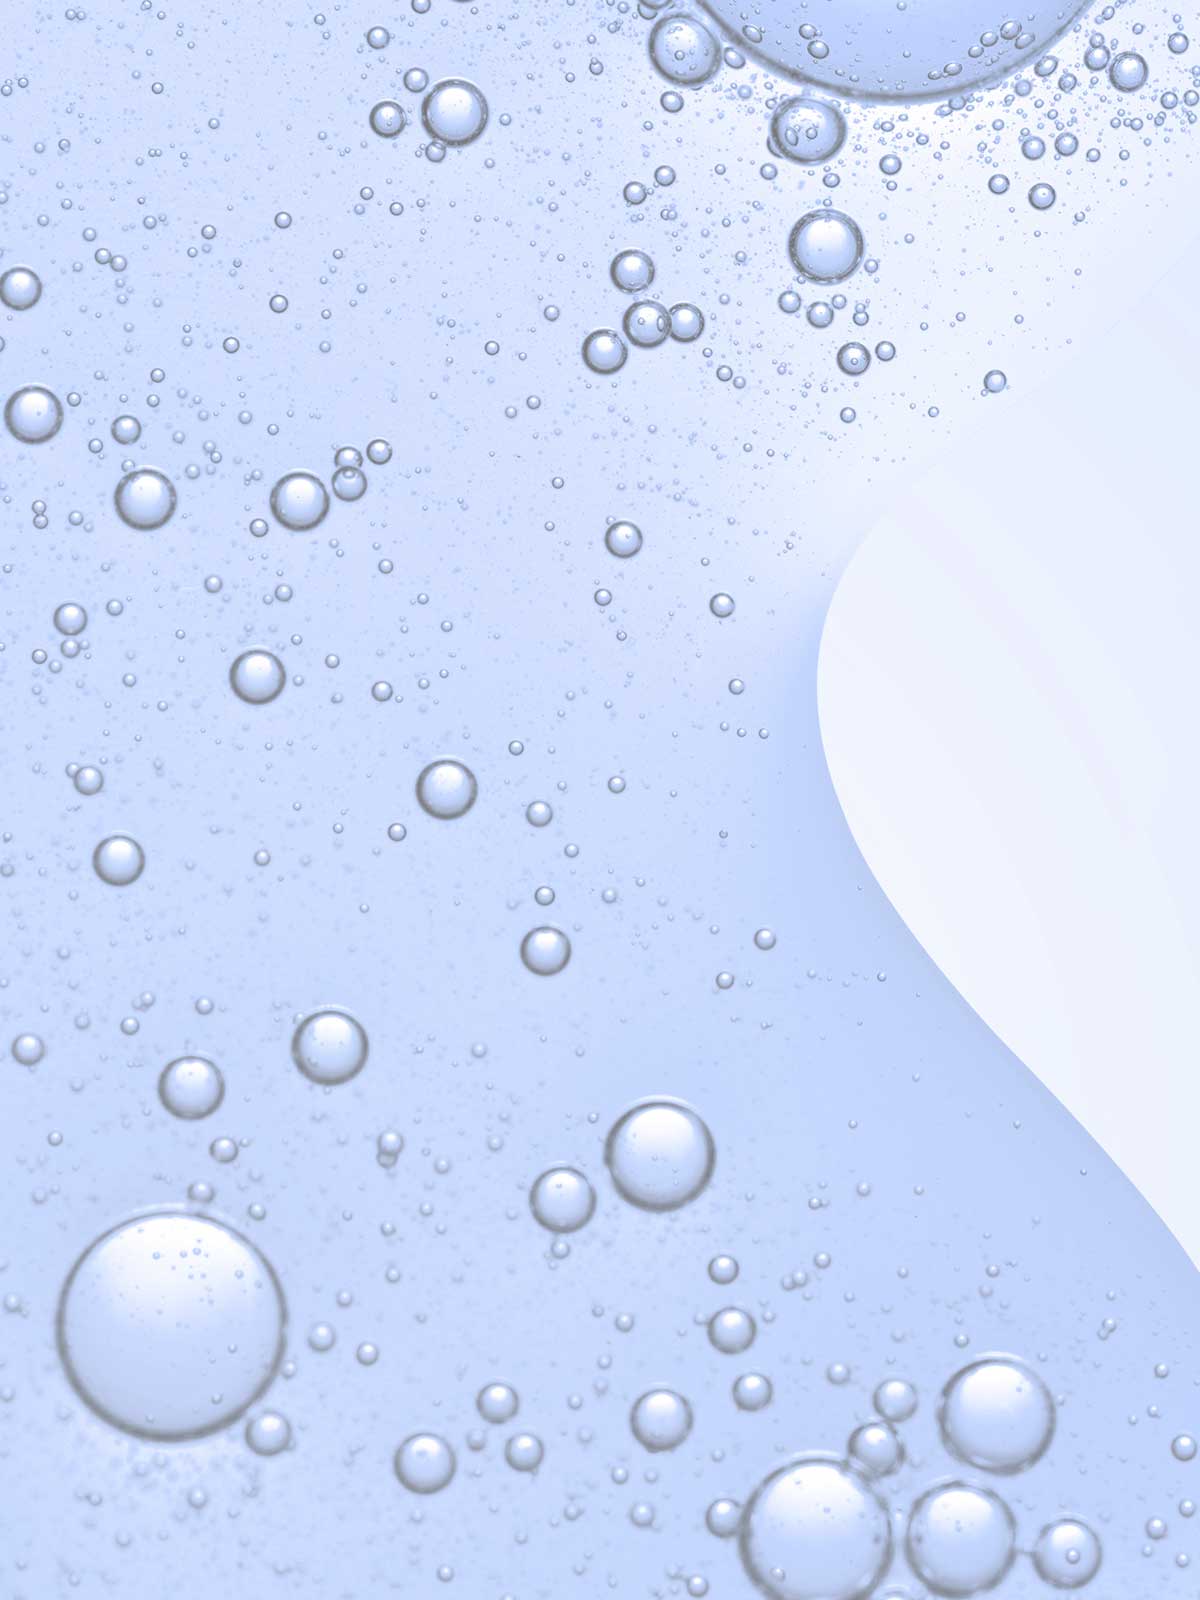 Water bubbles on a blue background.